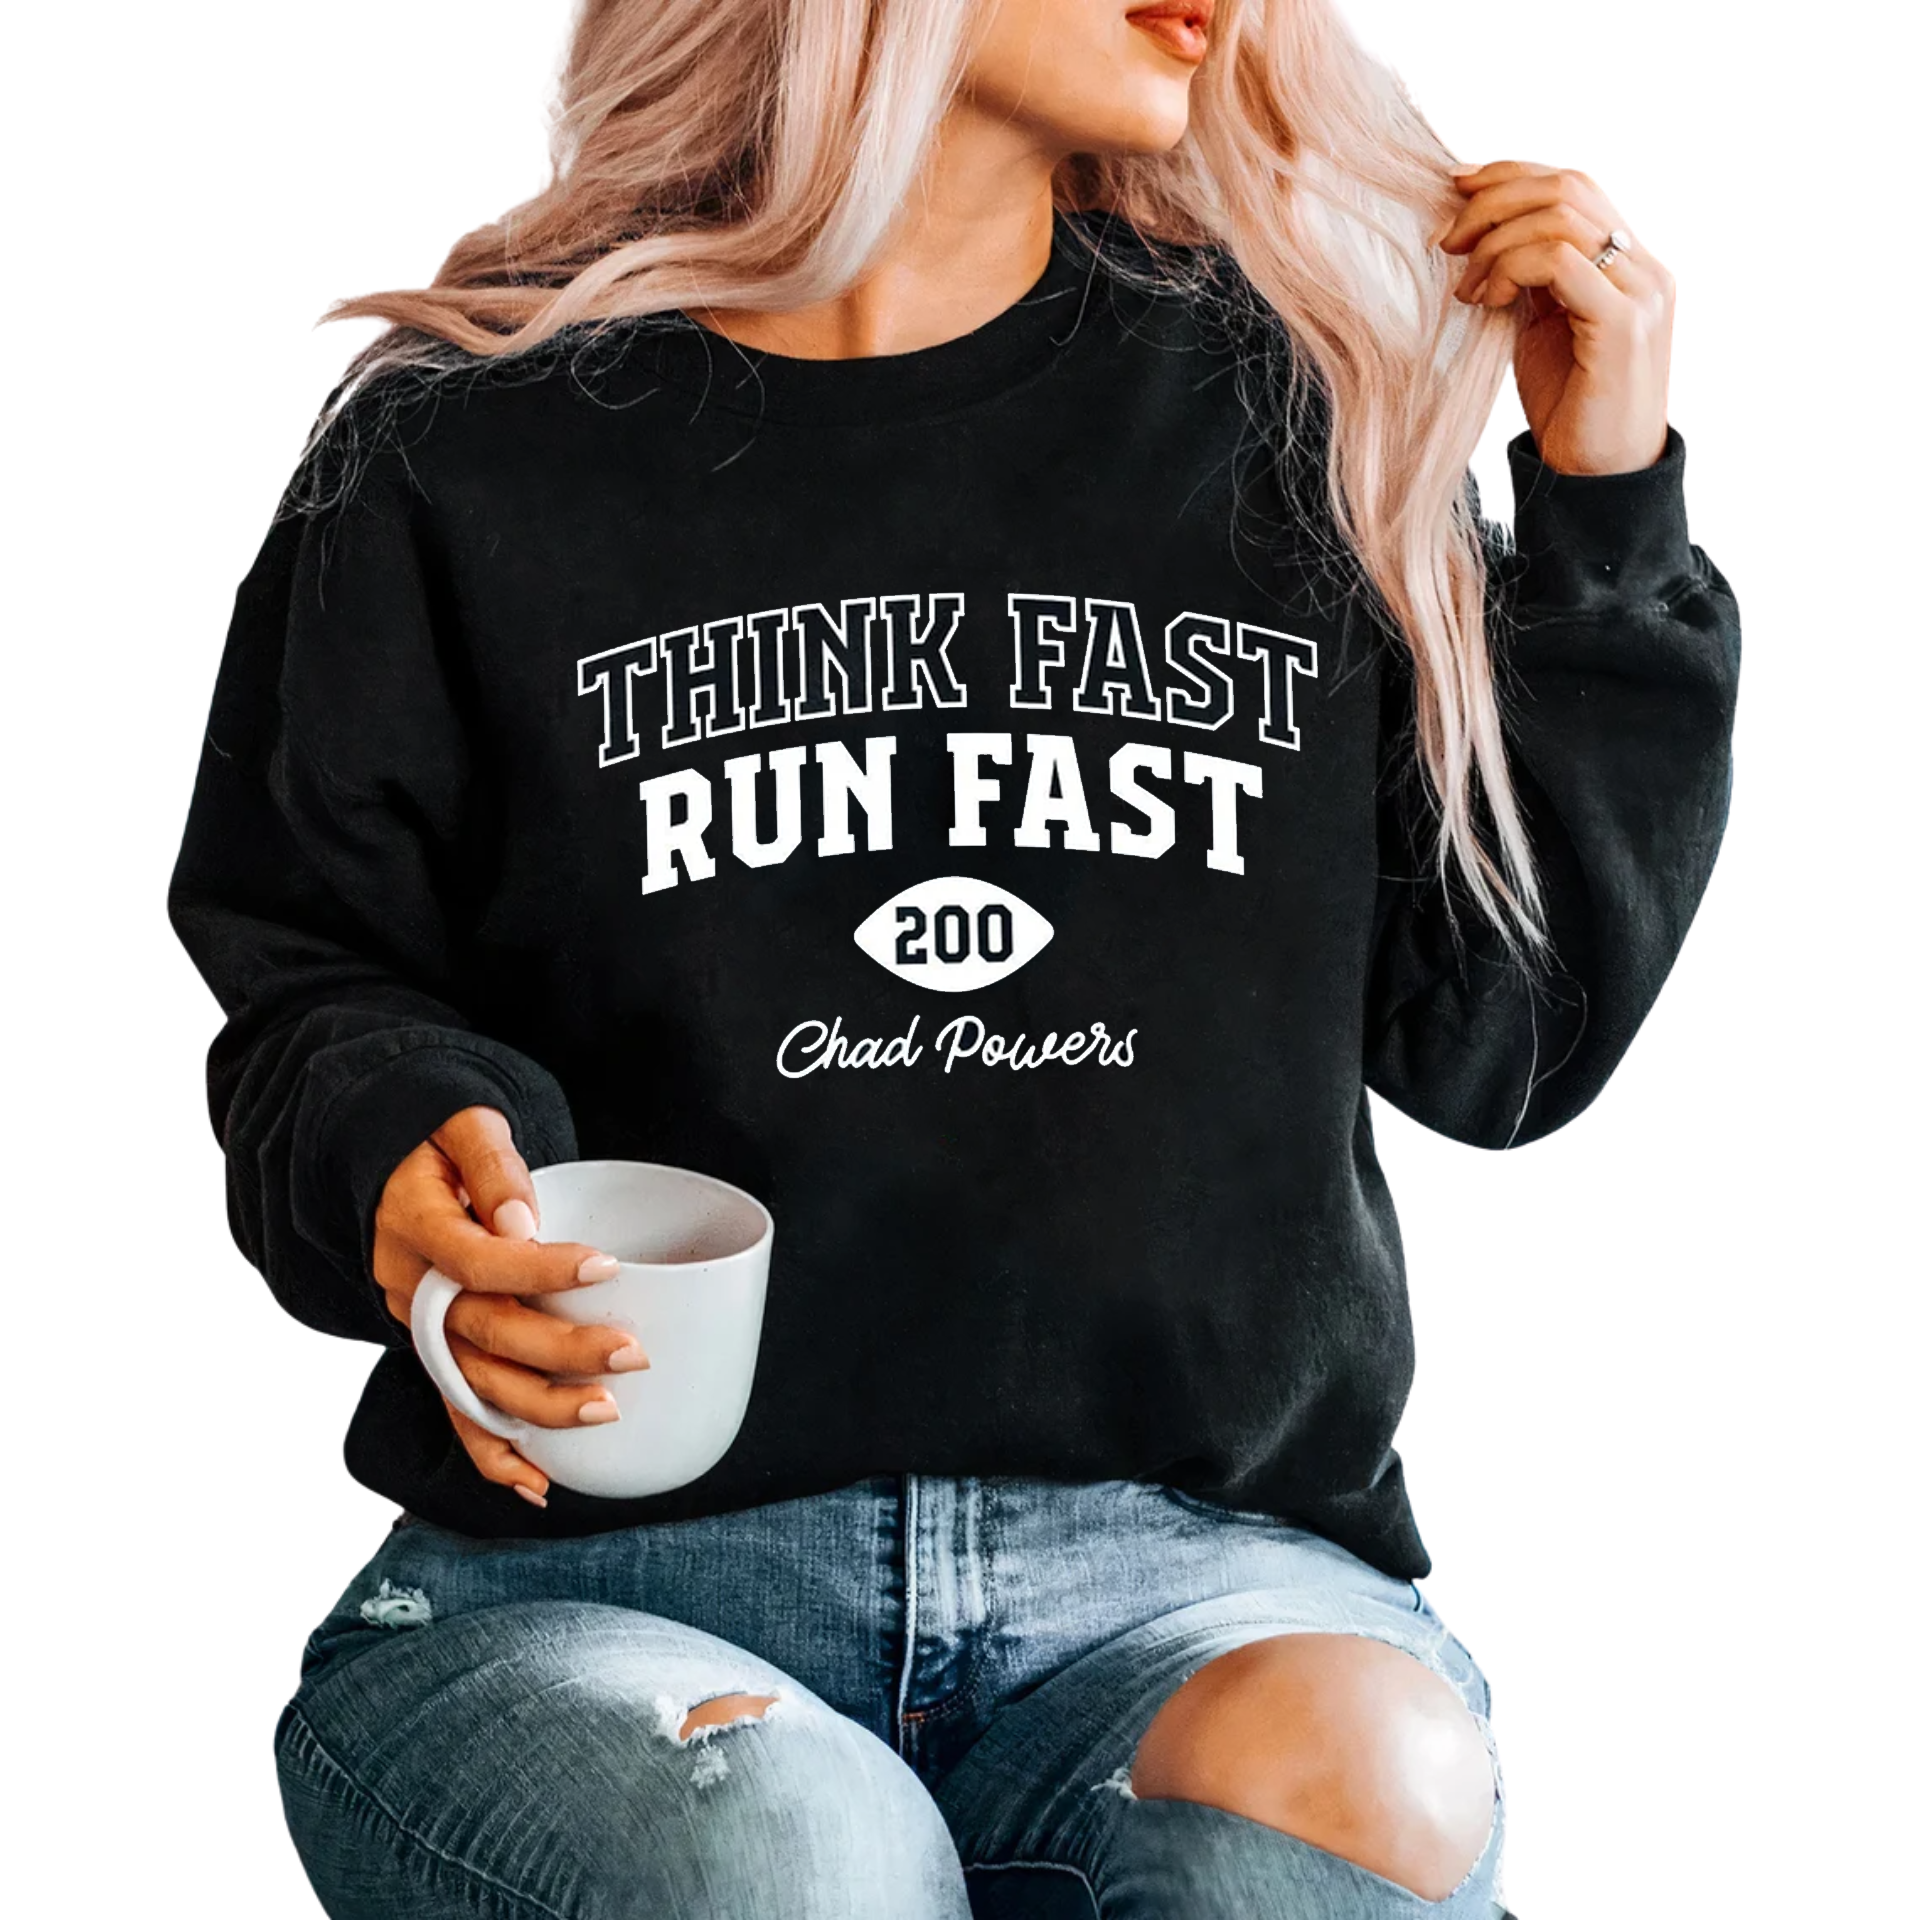 Chaad Powers Shirt, Think Fast Run Fast T-Shirt, Powers For MVP 2022 Sweatshirt, Football Collage MVP 200, Your Football Favorite Team, Go Ball, Pen State Football Shirt, 5.49 Chadd Run Fast Shirt